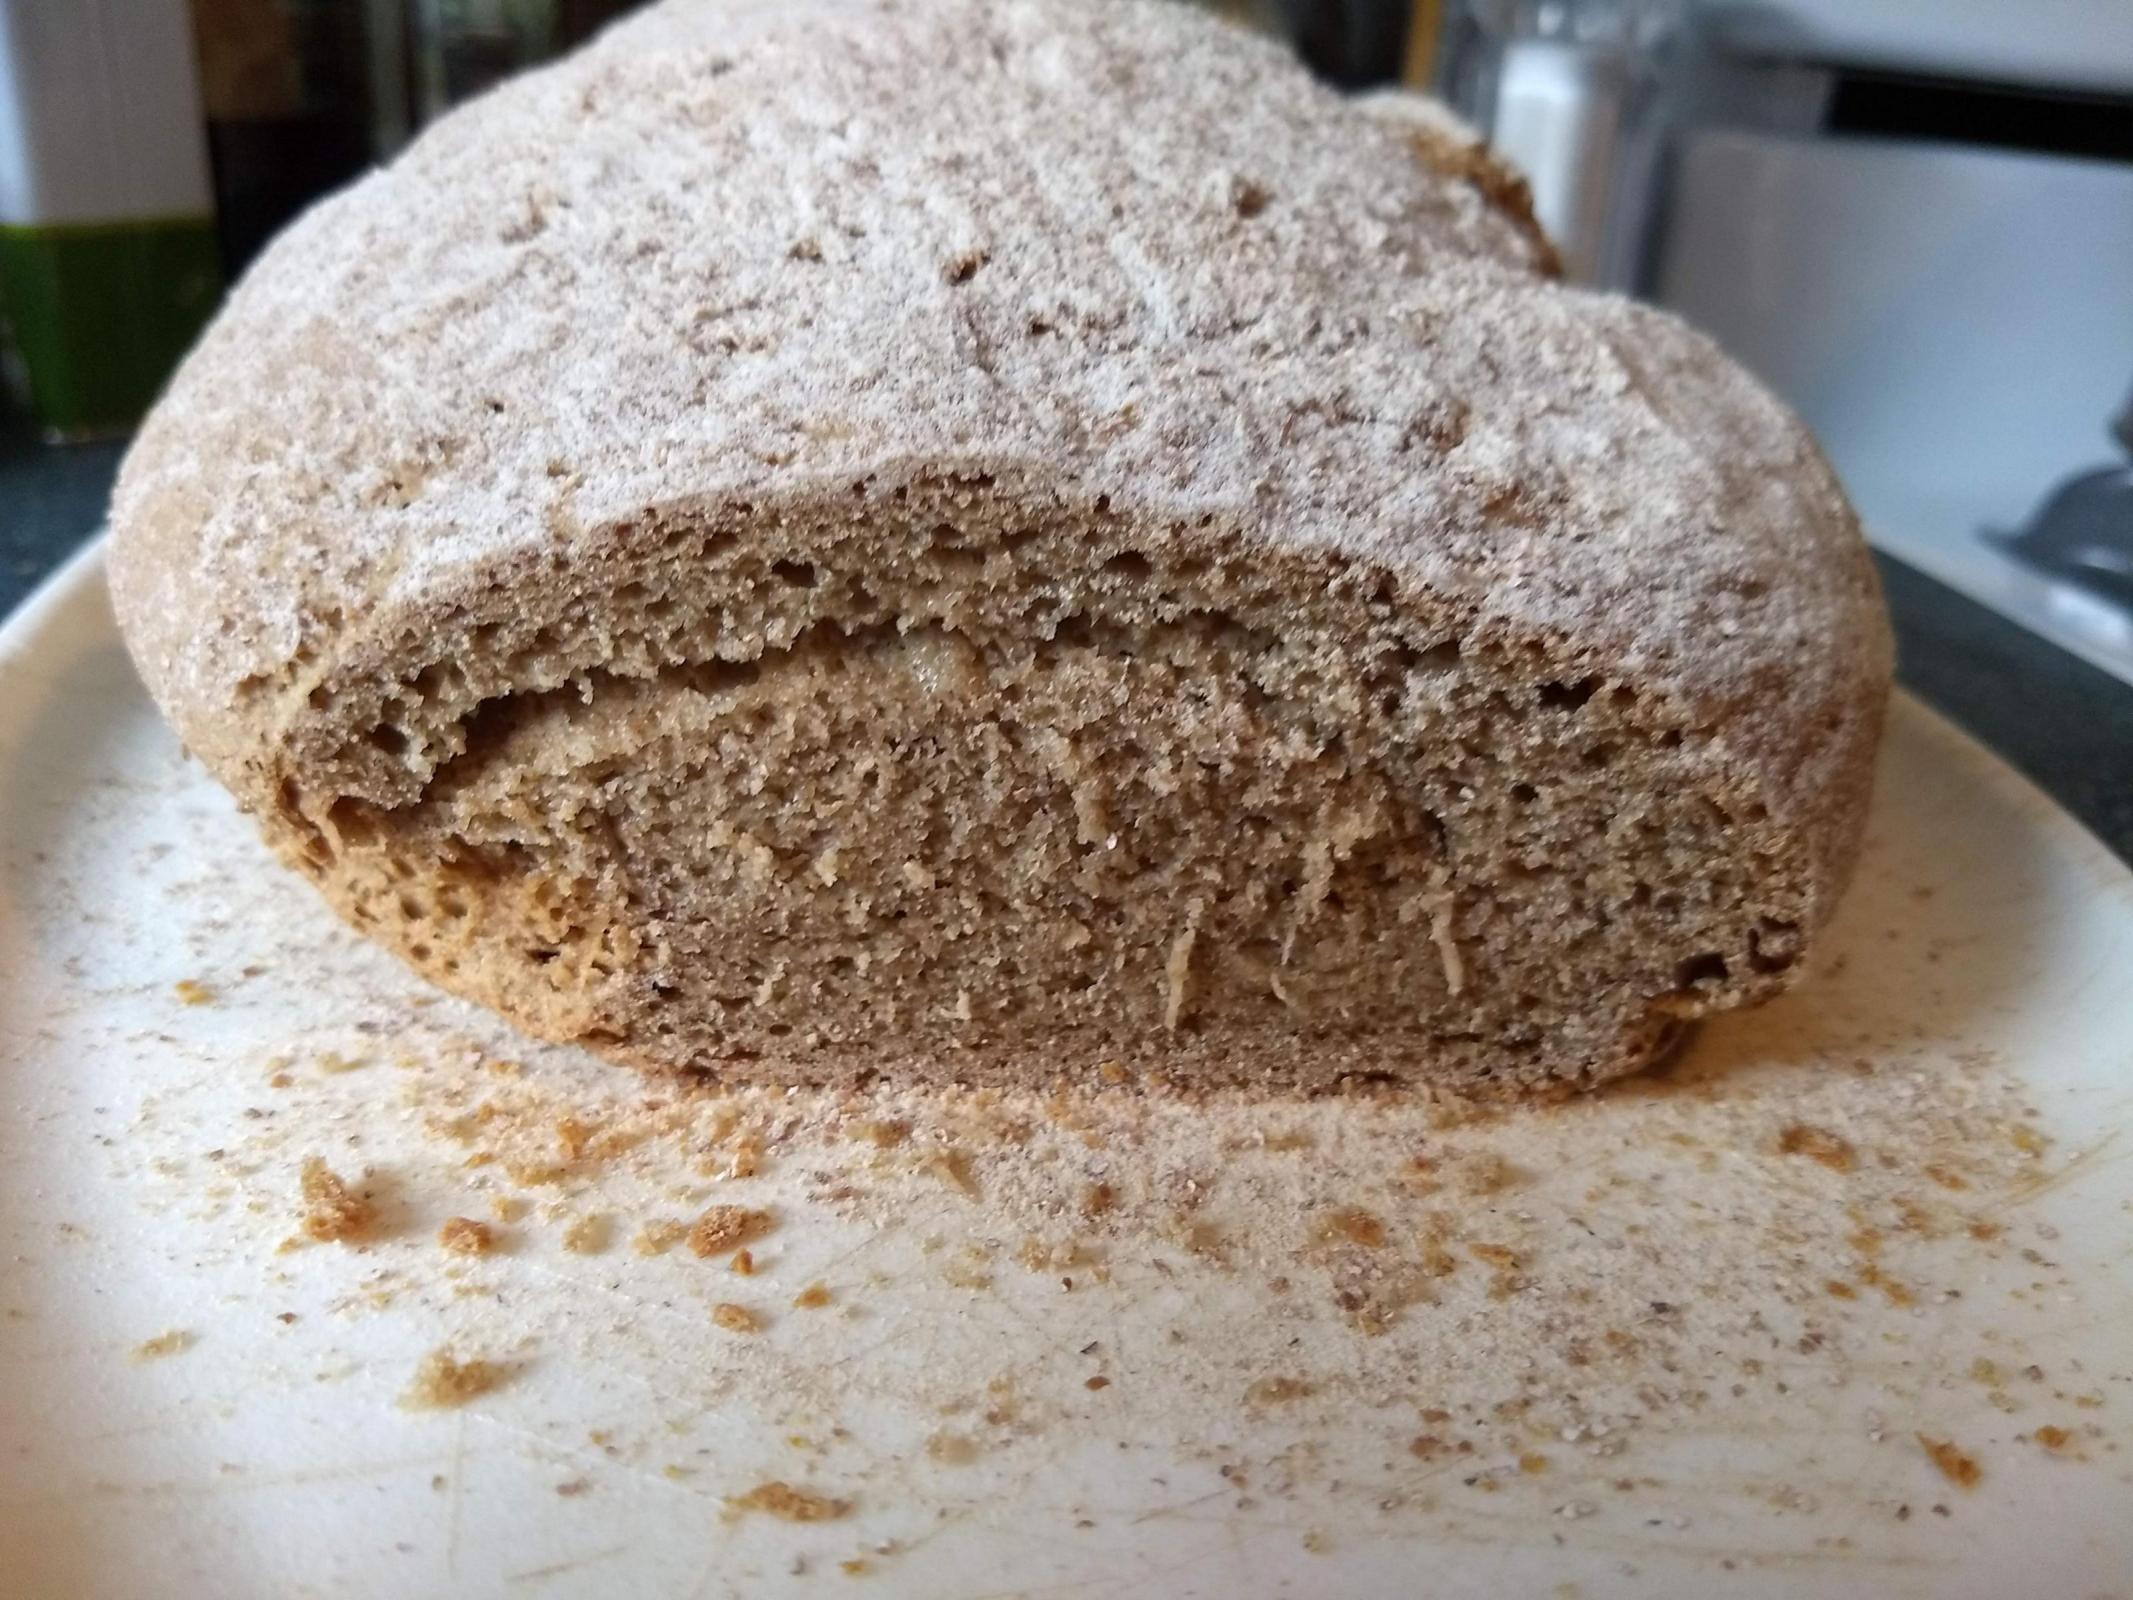 Behold, the crumb